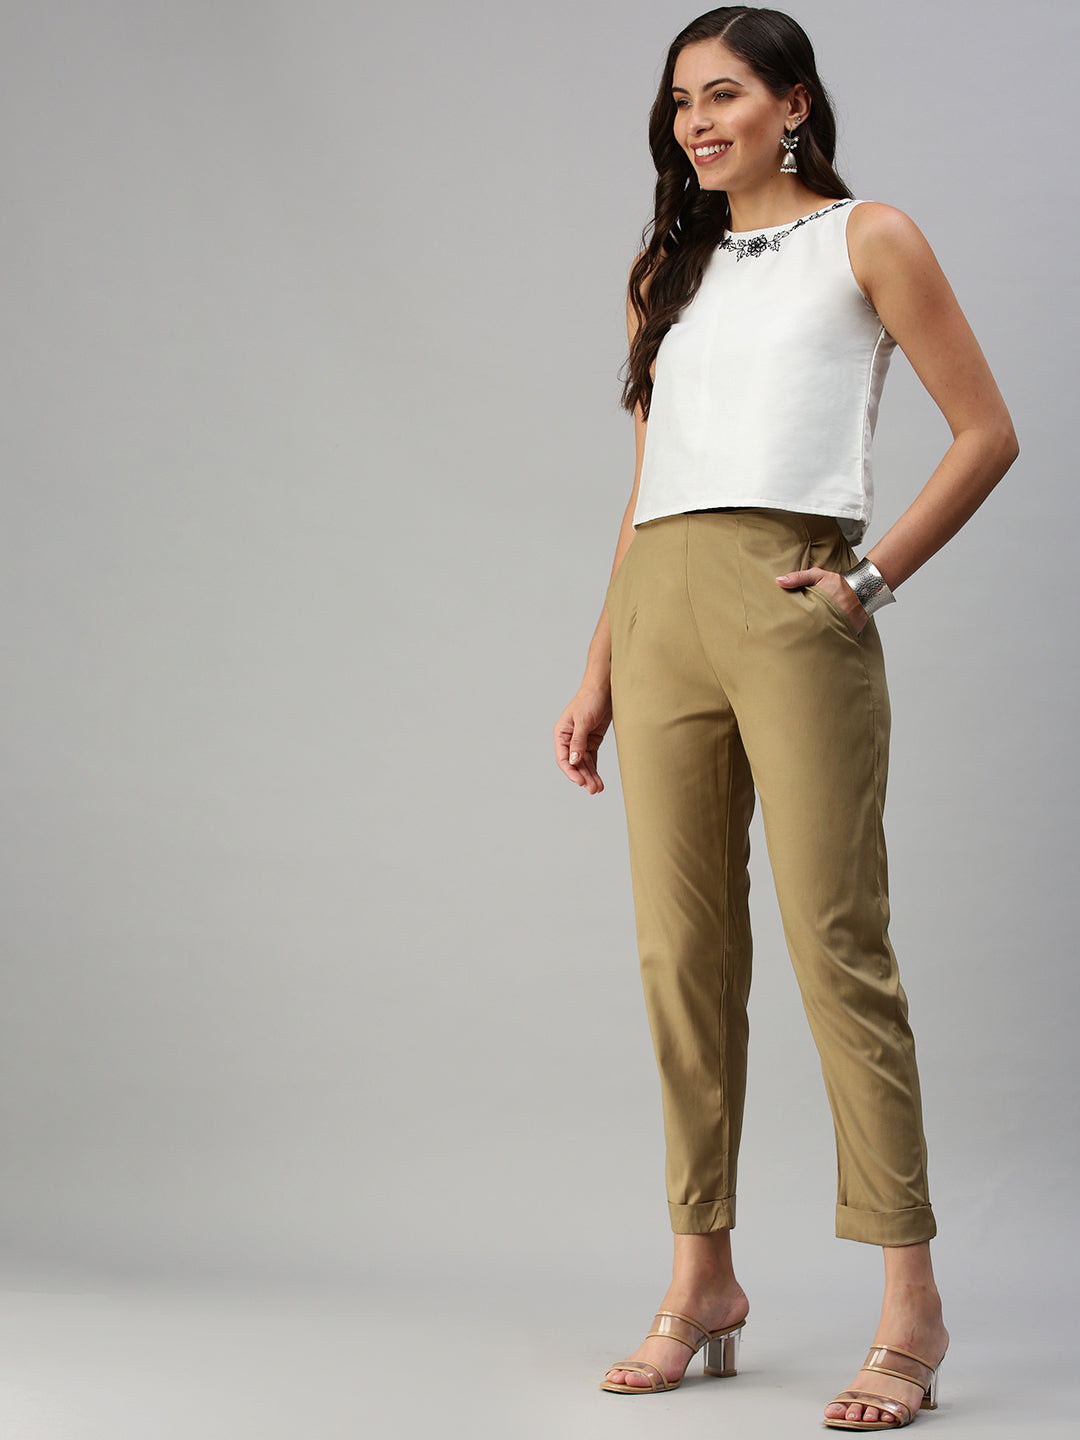 FLOREOS Regular Fit Women Gold, Blue Trousers - Buy FLOREOS Regular Fit  Women Gold, Blue Trousers Online at Best Prices in India | Flipkart.com